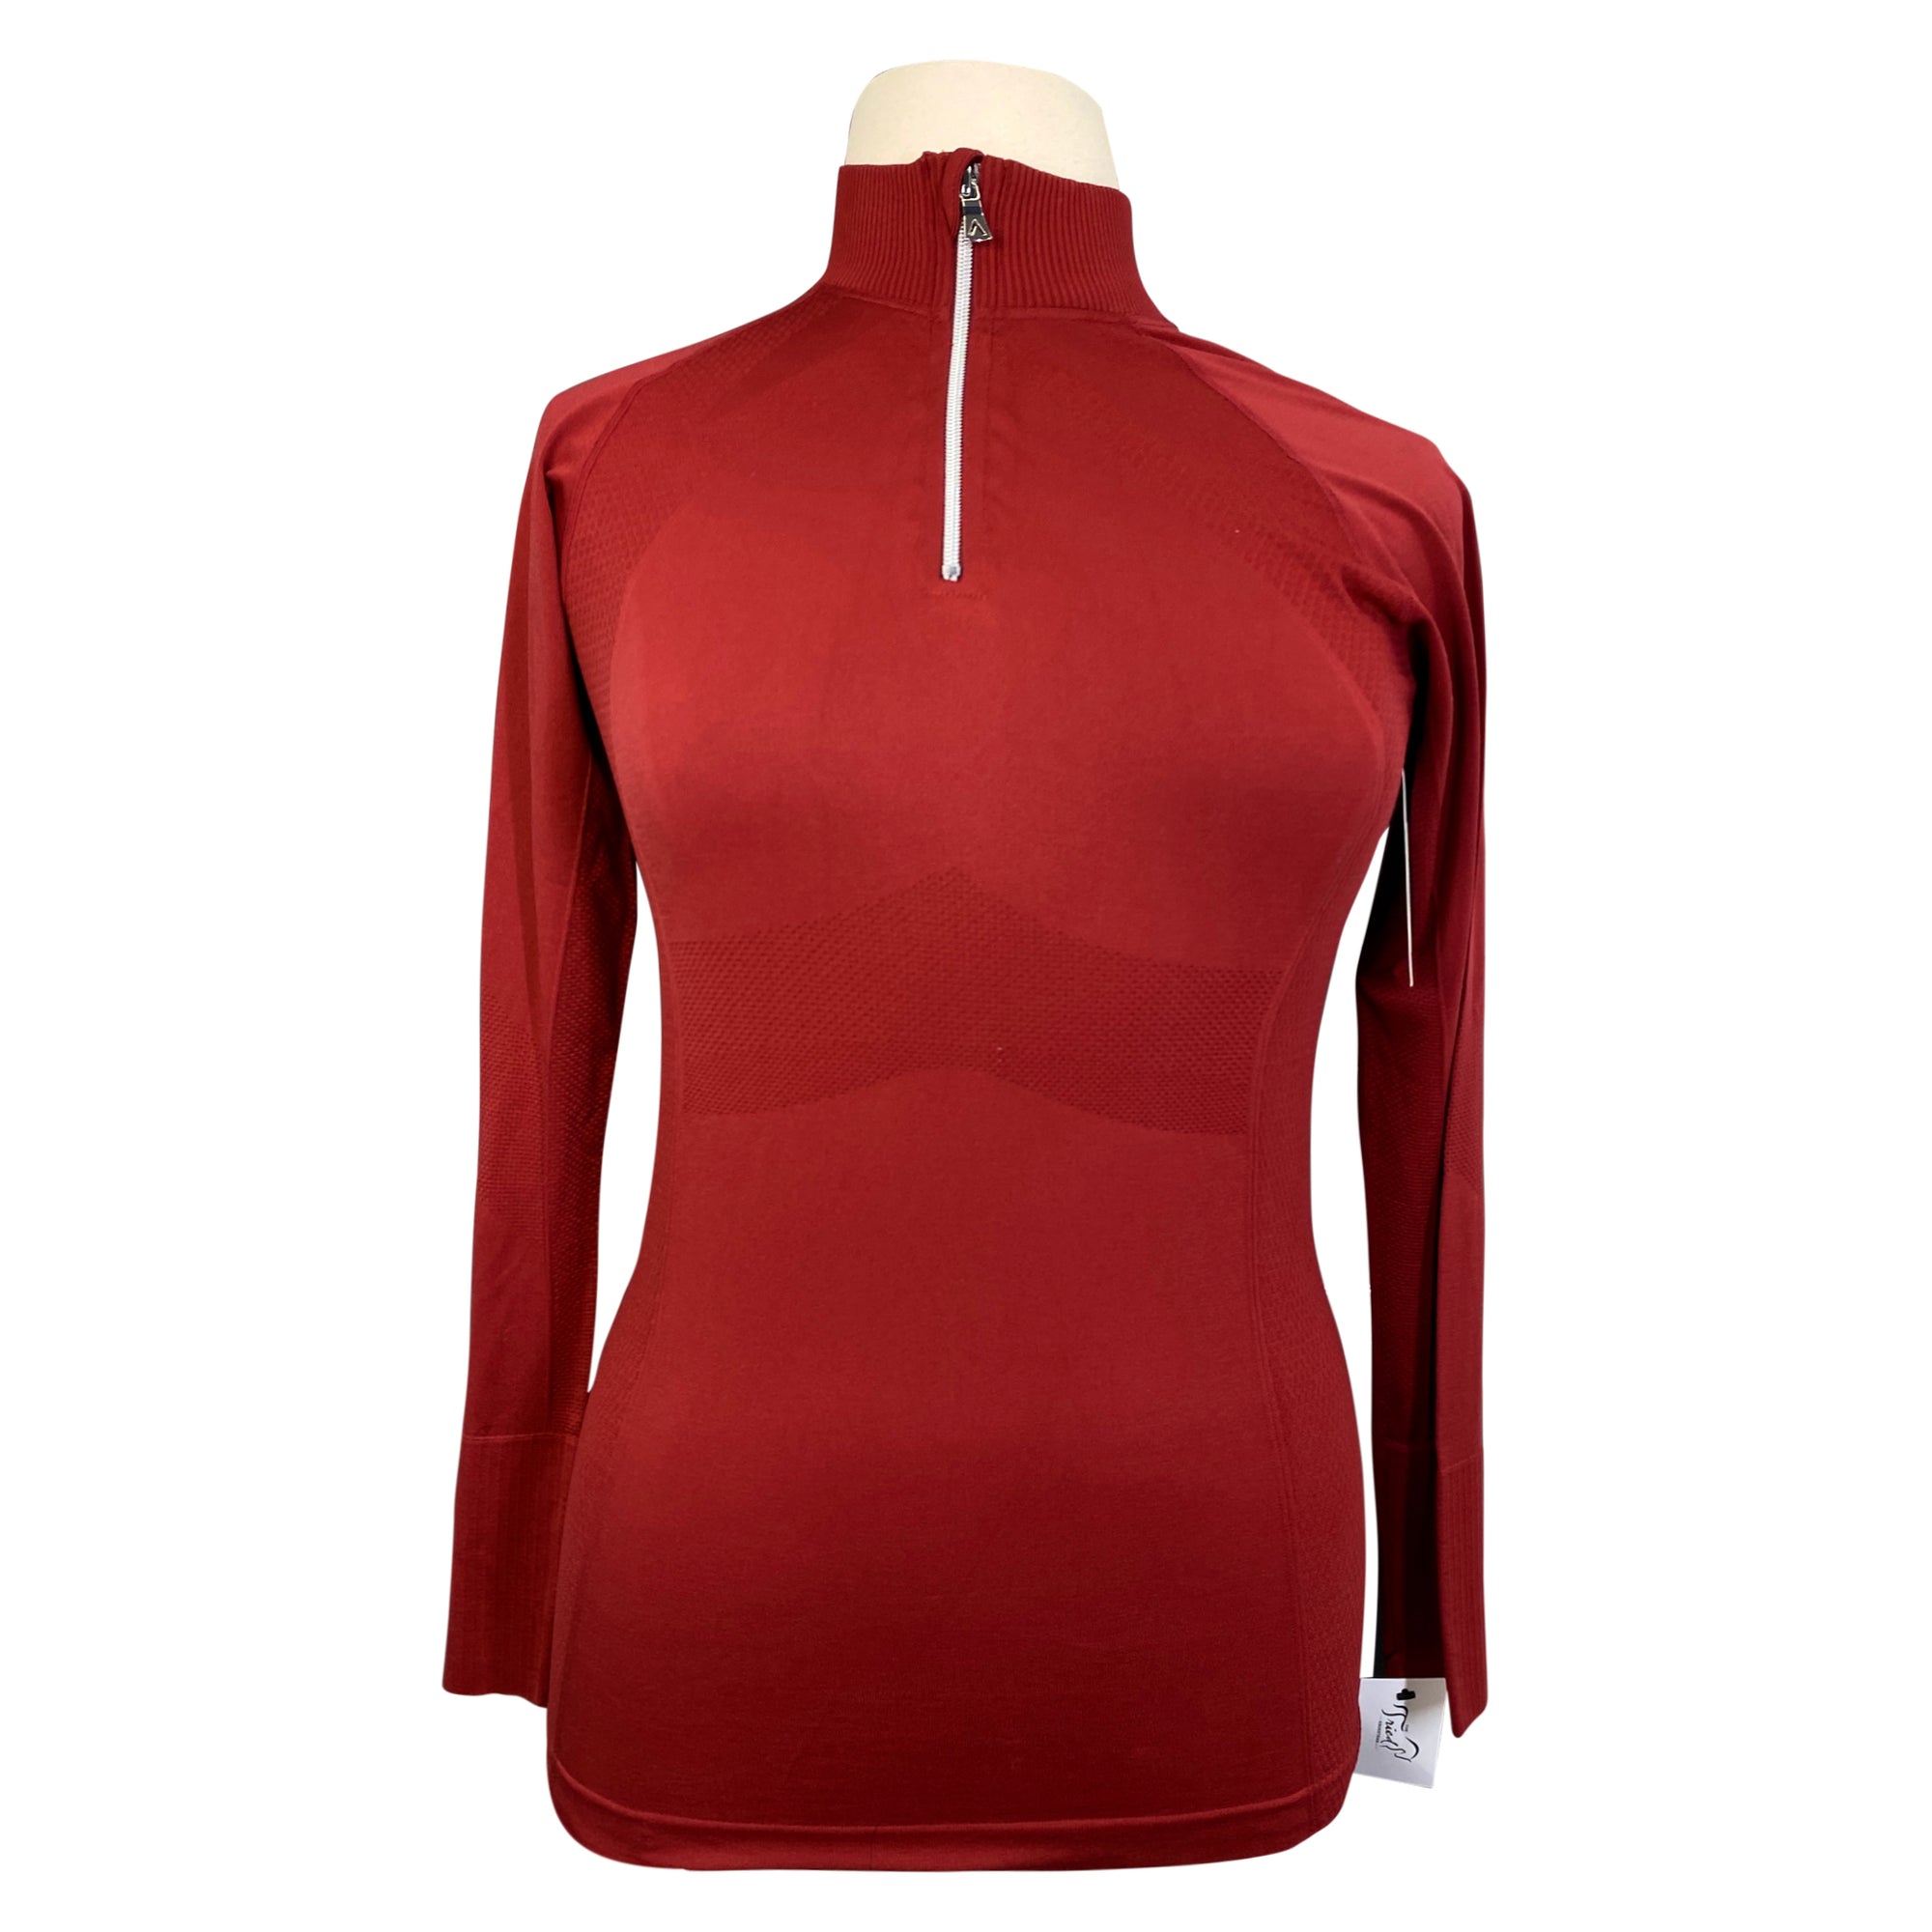 Anique Signature Sunshirt in Ruby